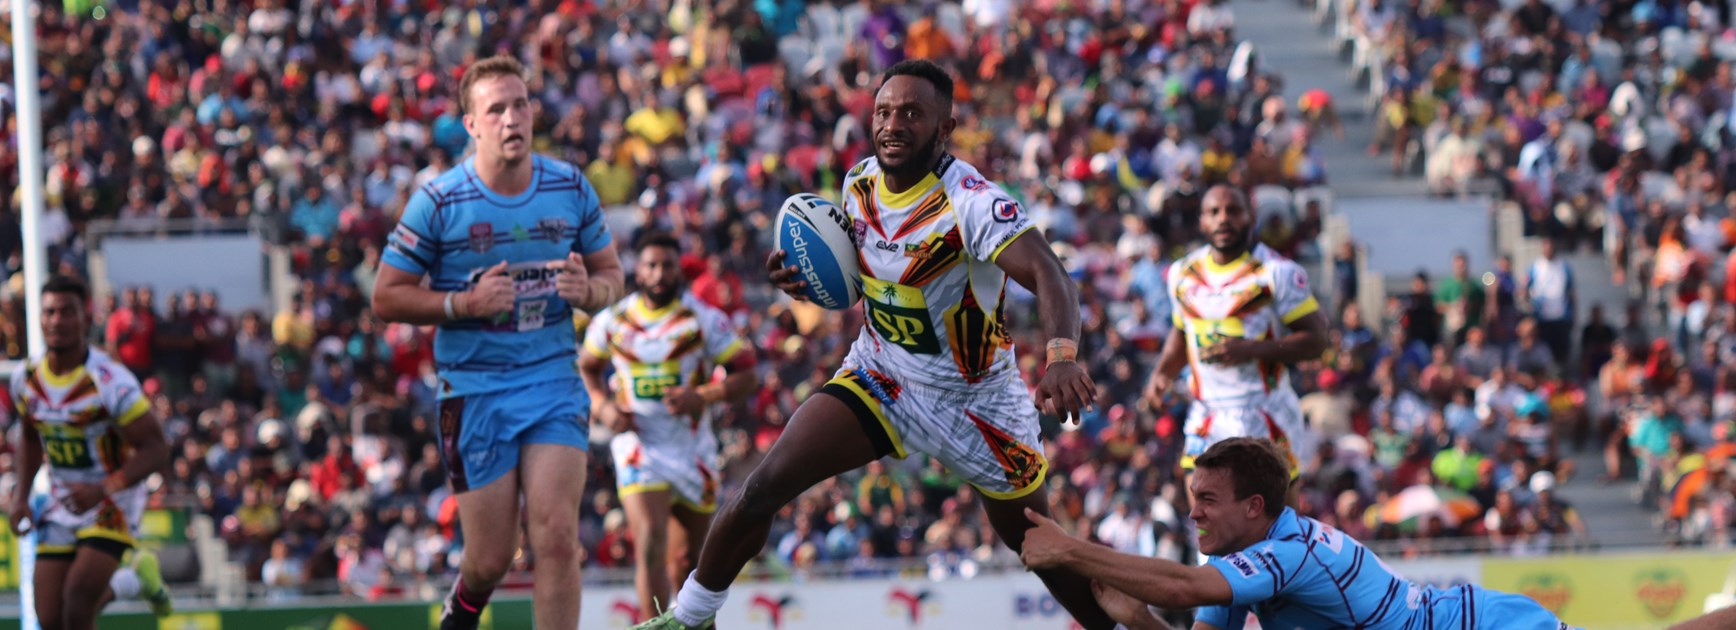 PNG Hunters overpower Capras in Port Moresby trial